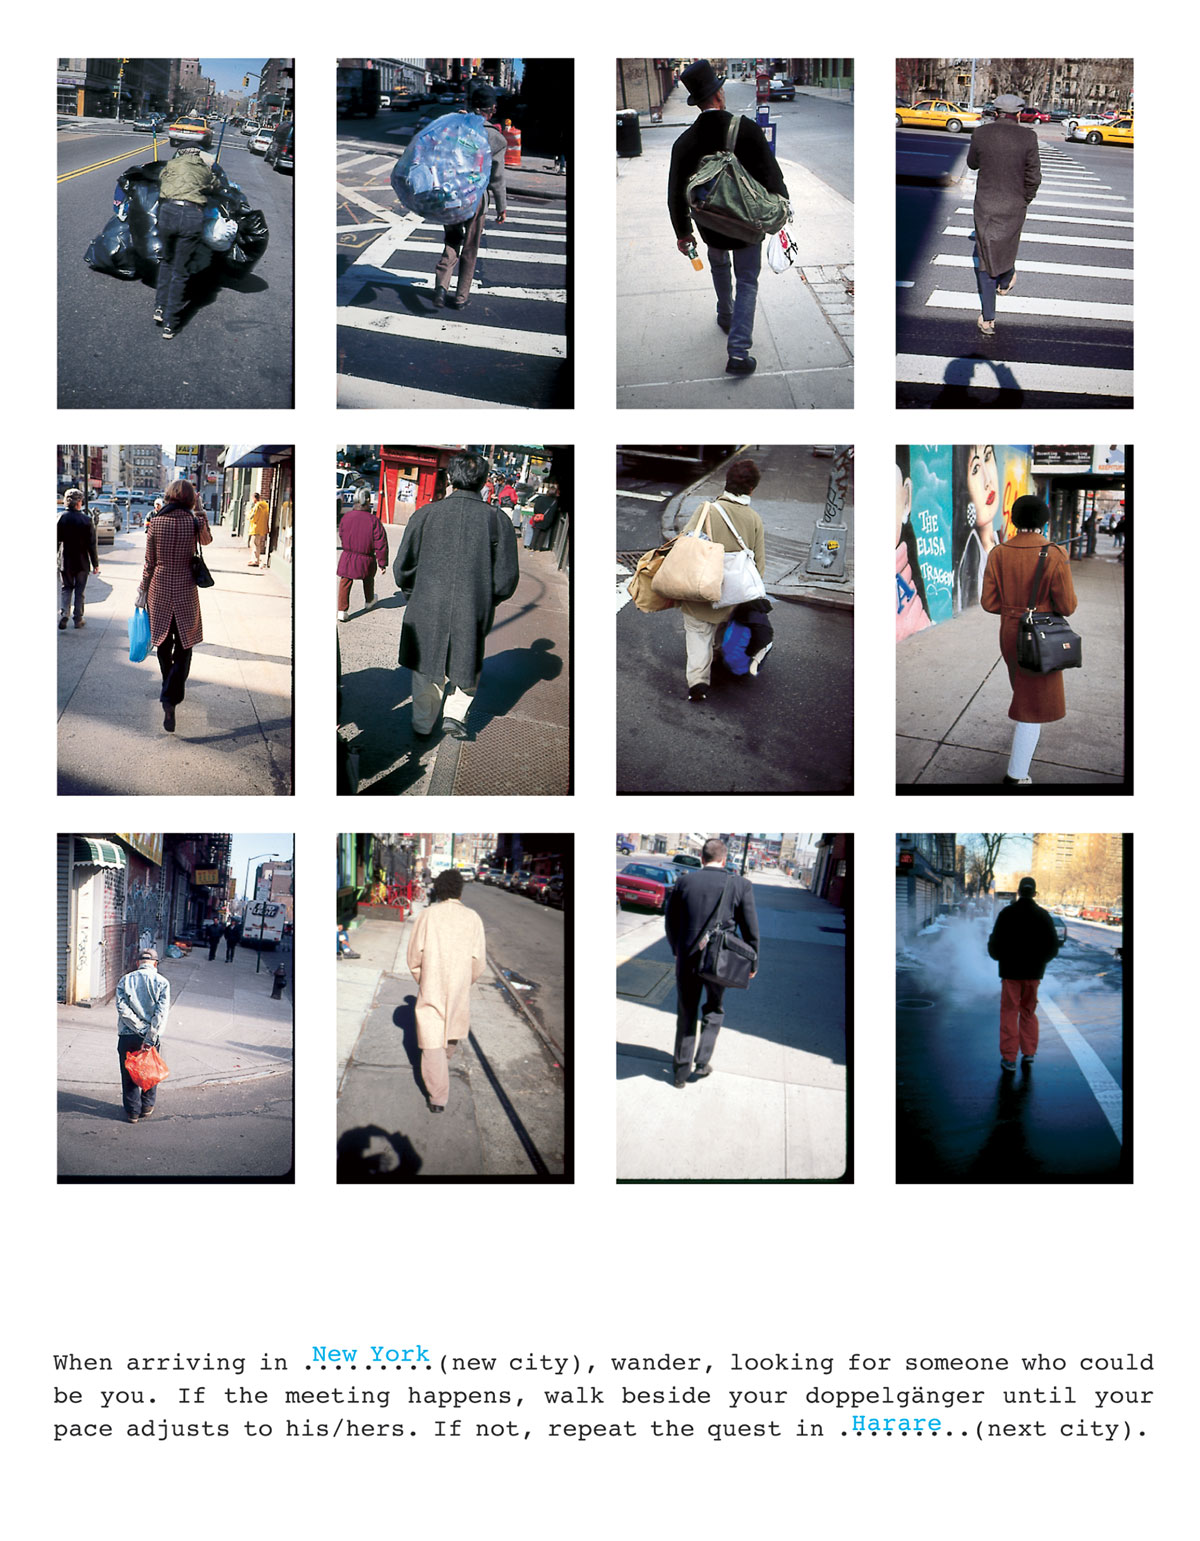 A series of twelve photographs by artist Francis Alÿs with the legend “When arriving in New York (new city), wander, looking for someone who could be you. If the meeting happens, walk beside your dopplegänger until your pace adjusts to his/hers. If not, repeat the quest in Harare (next city).”